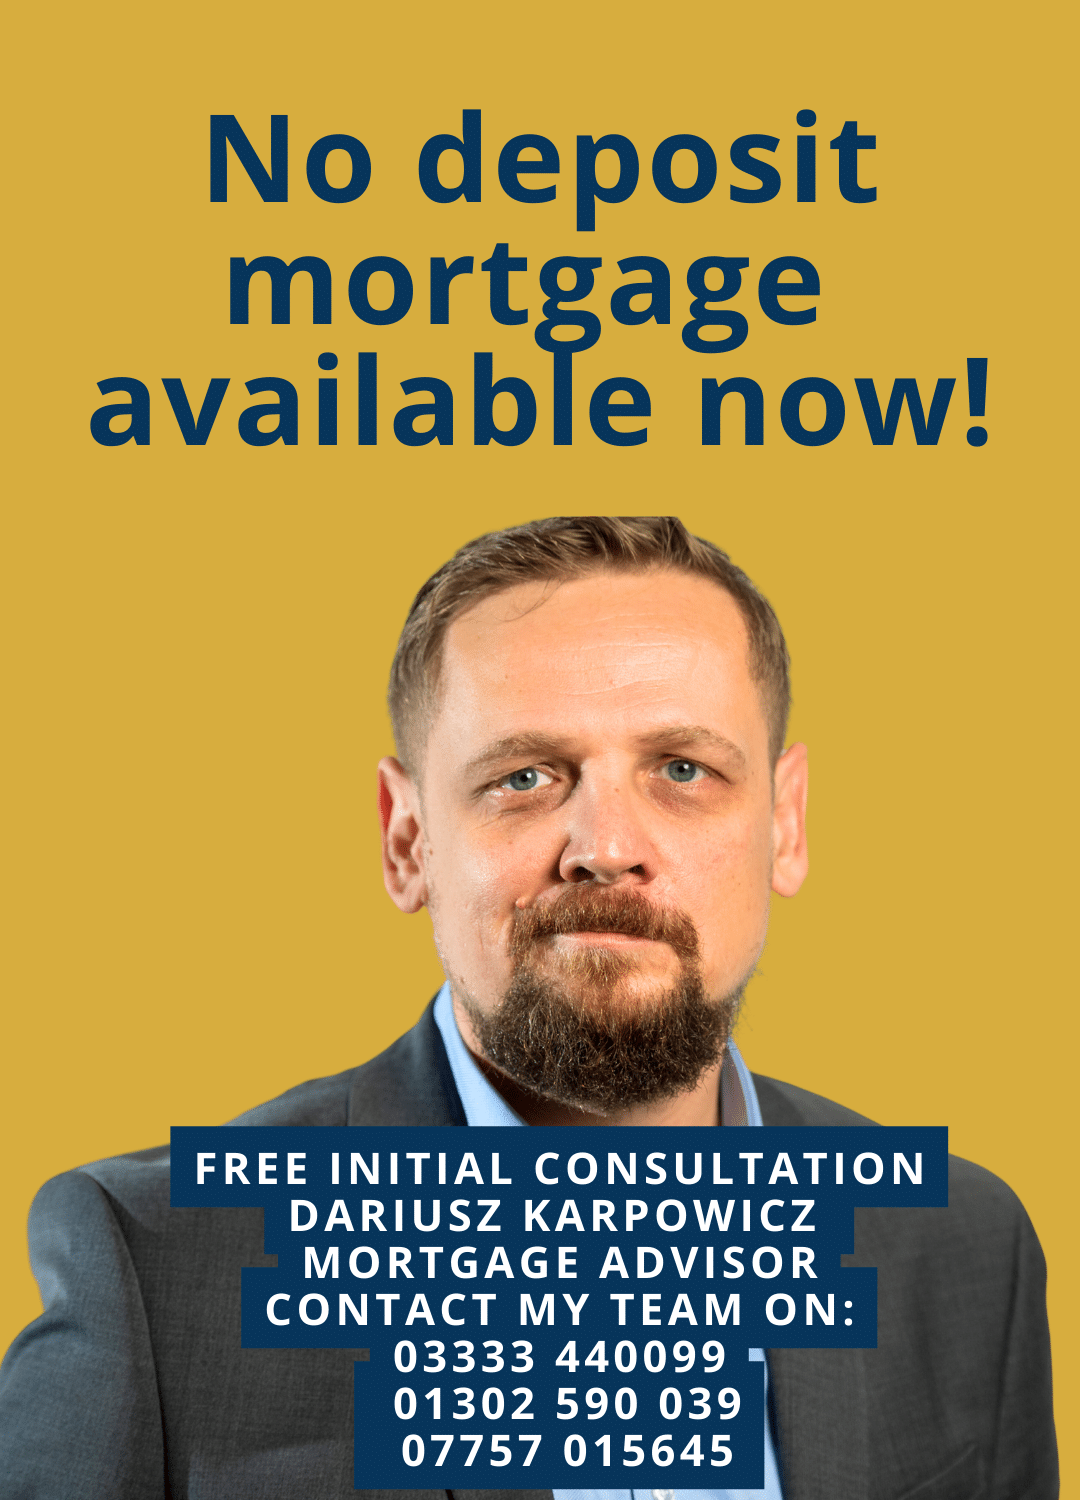 No deposit mortgage available now!